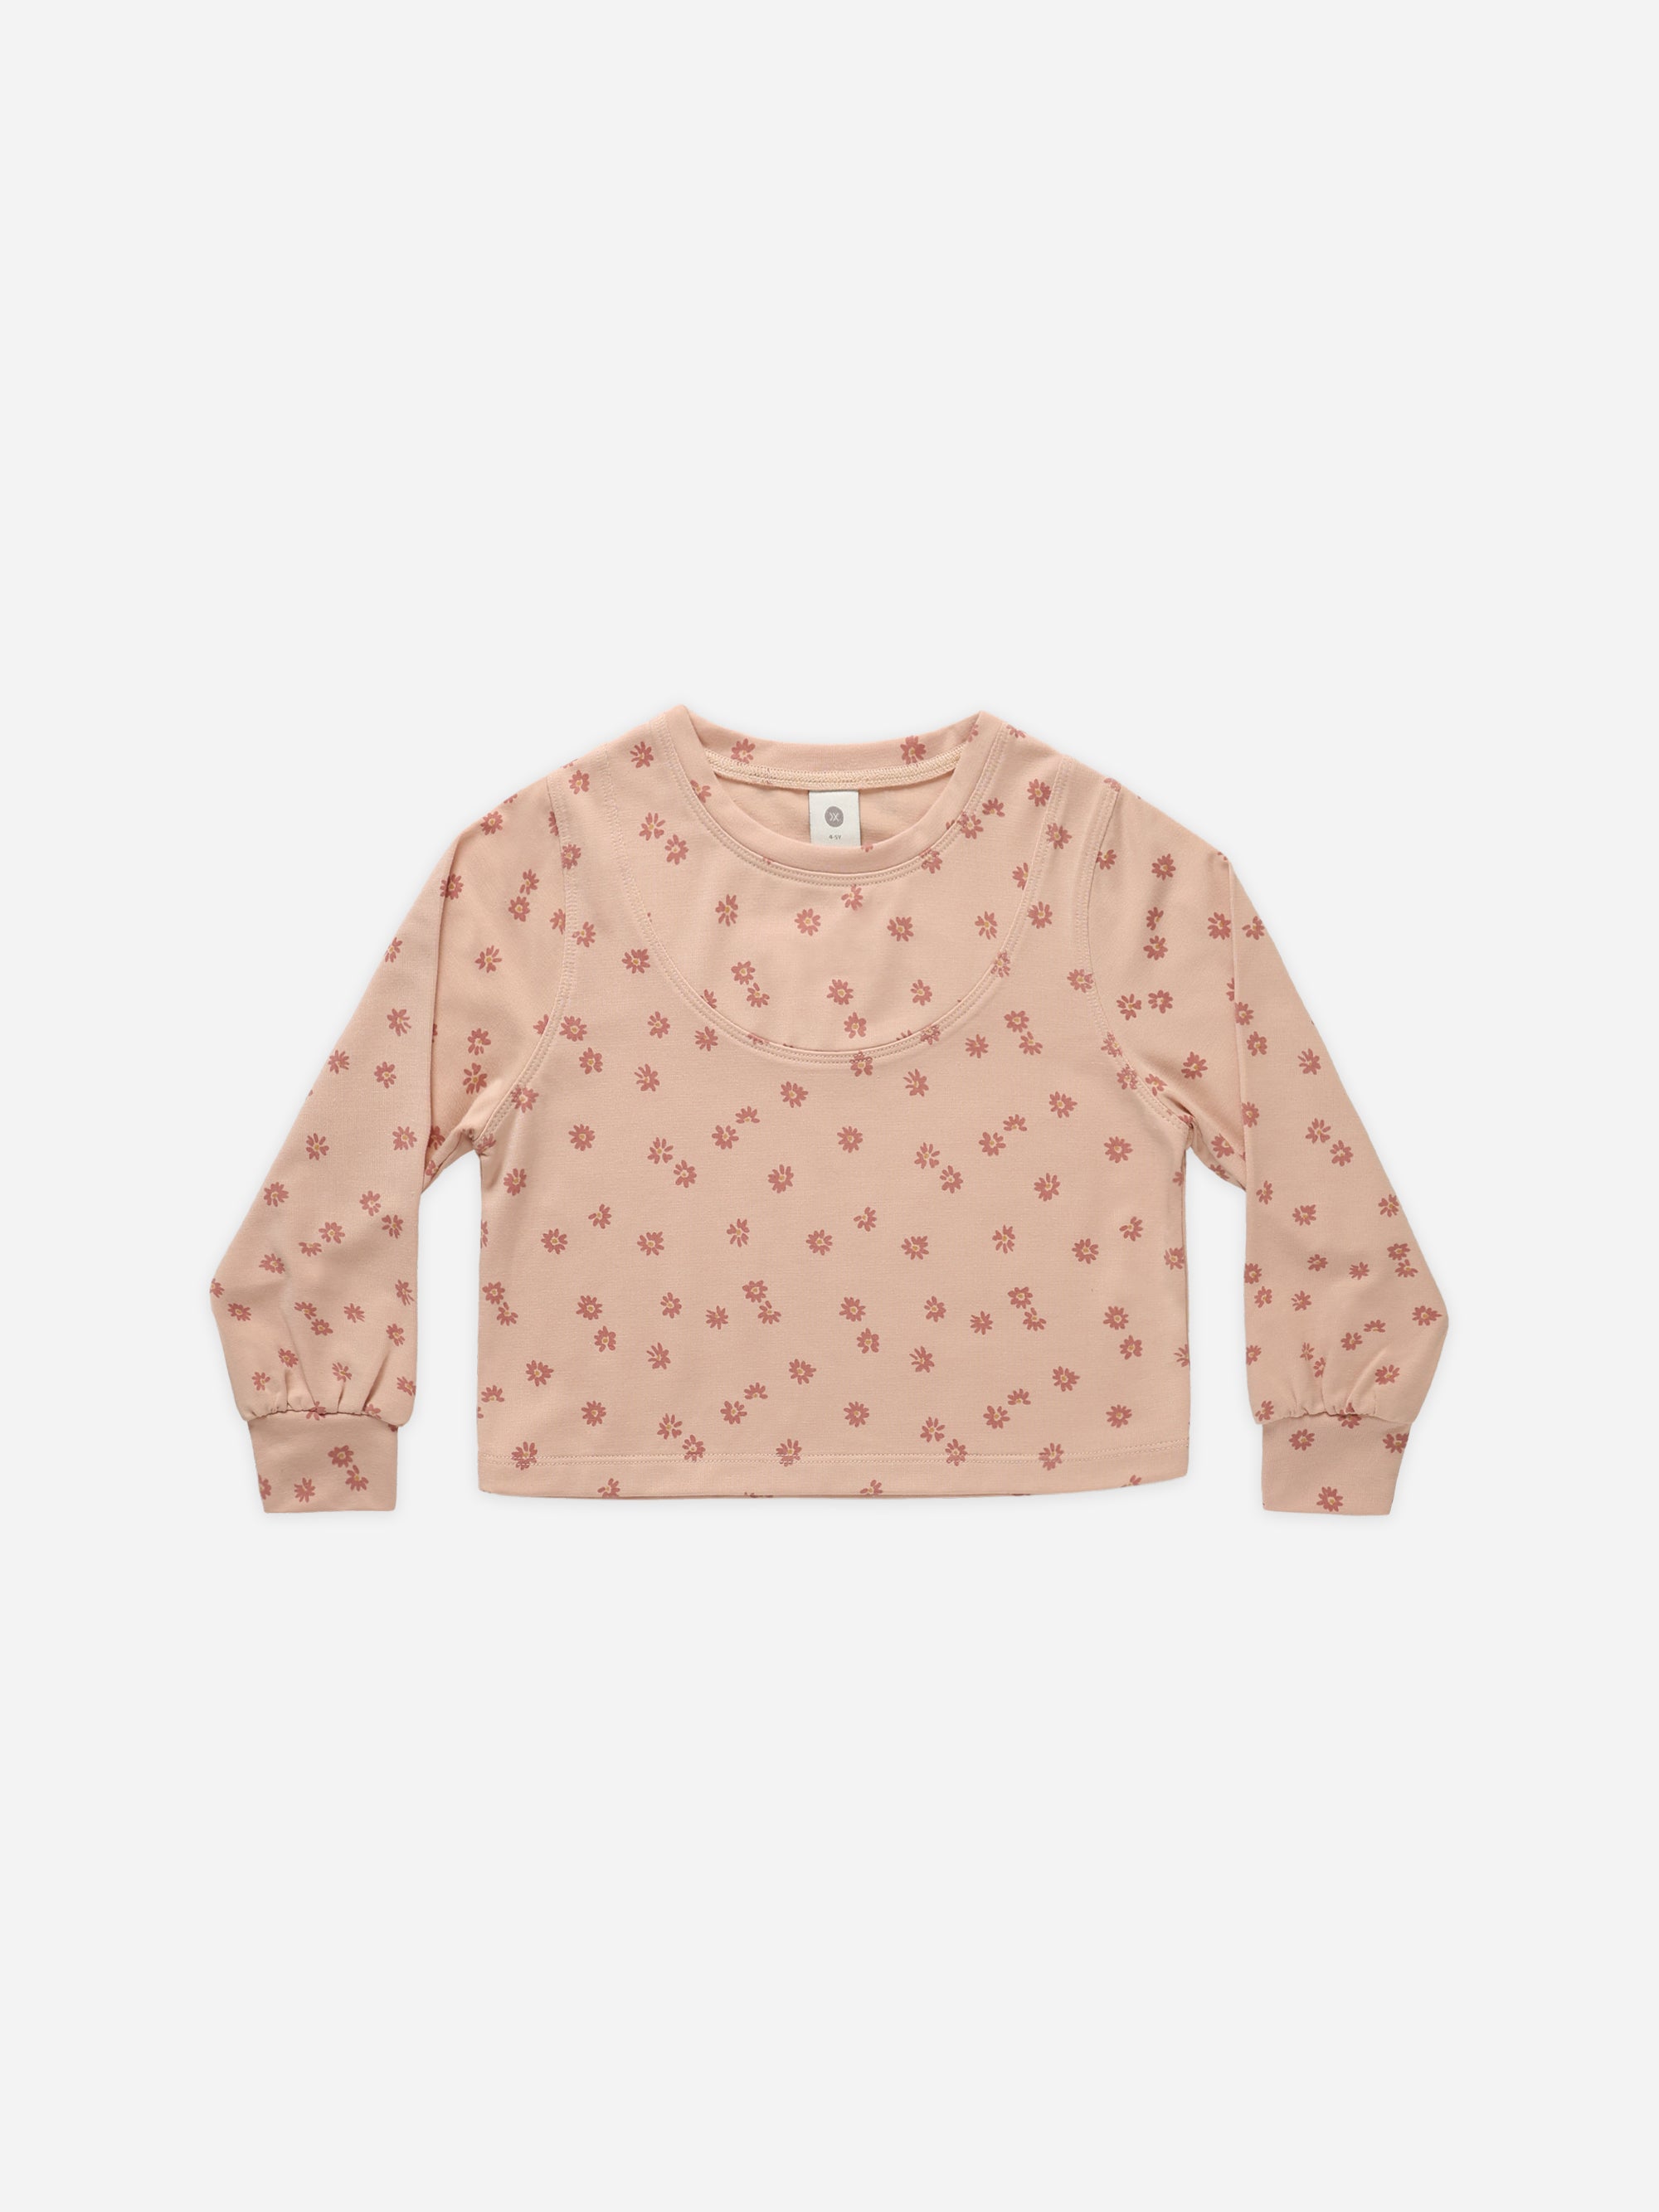 Scoop Long Sleeve || Pink Daisy - Rylee + Cru | Kids Clothes | Trendy Baby Clothes | Modern Infant Outfits |